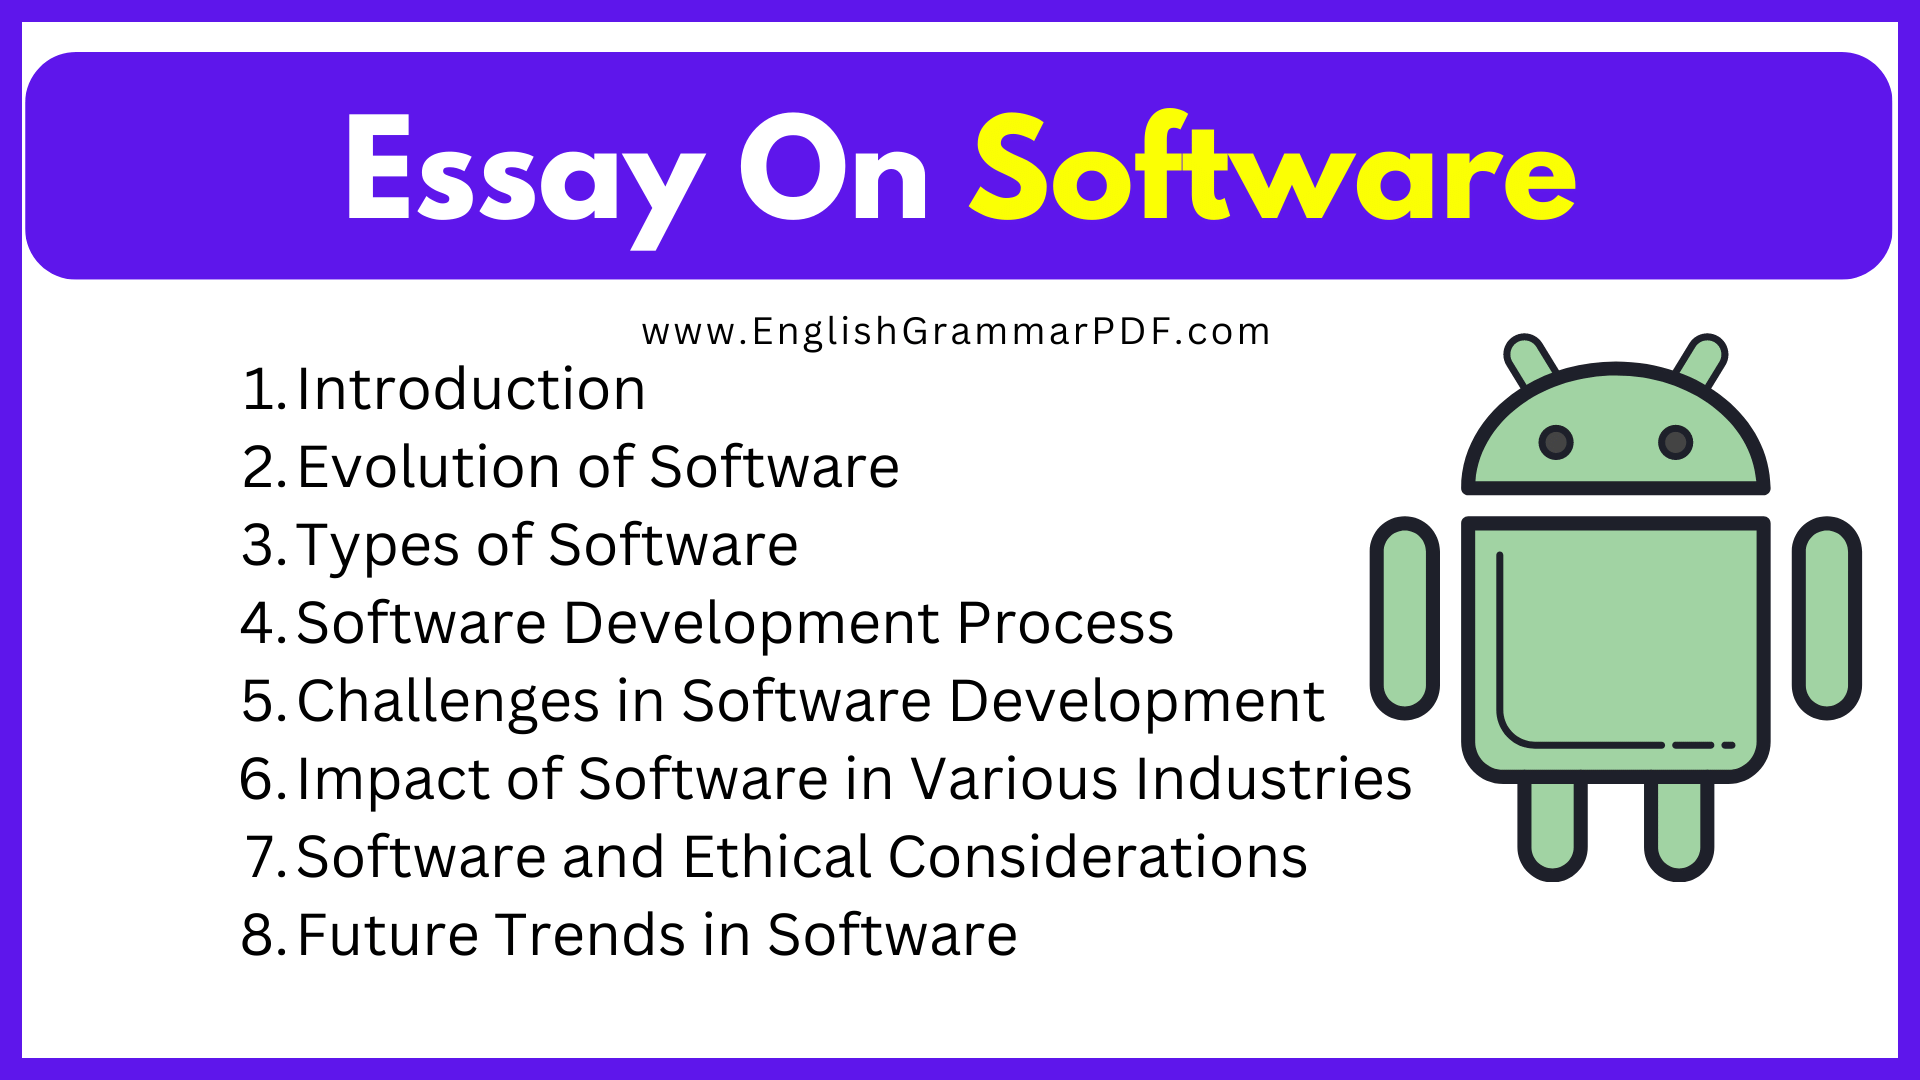 Essay On Software